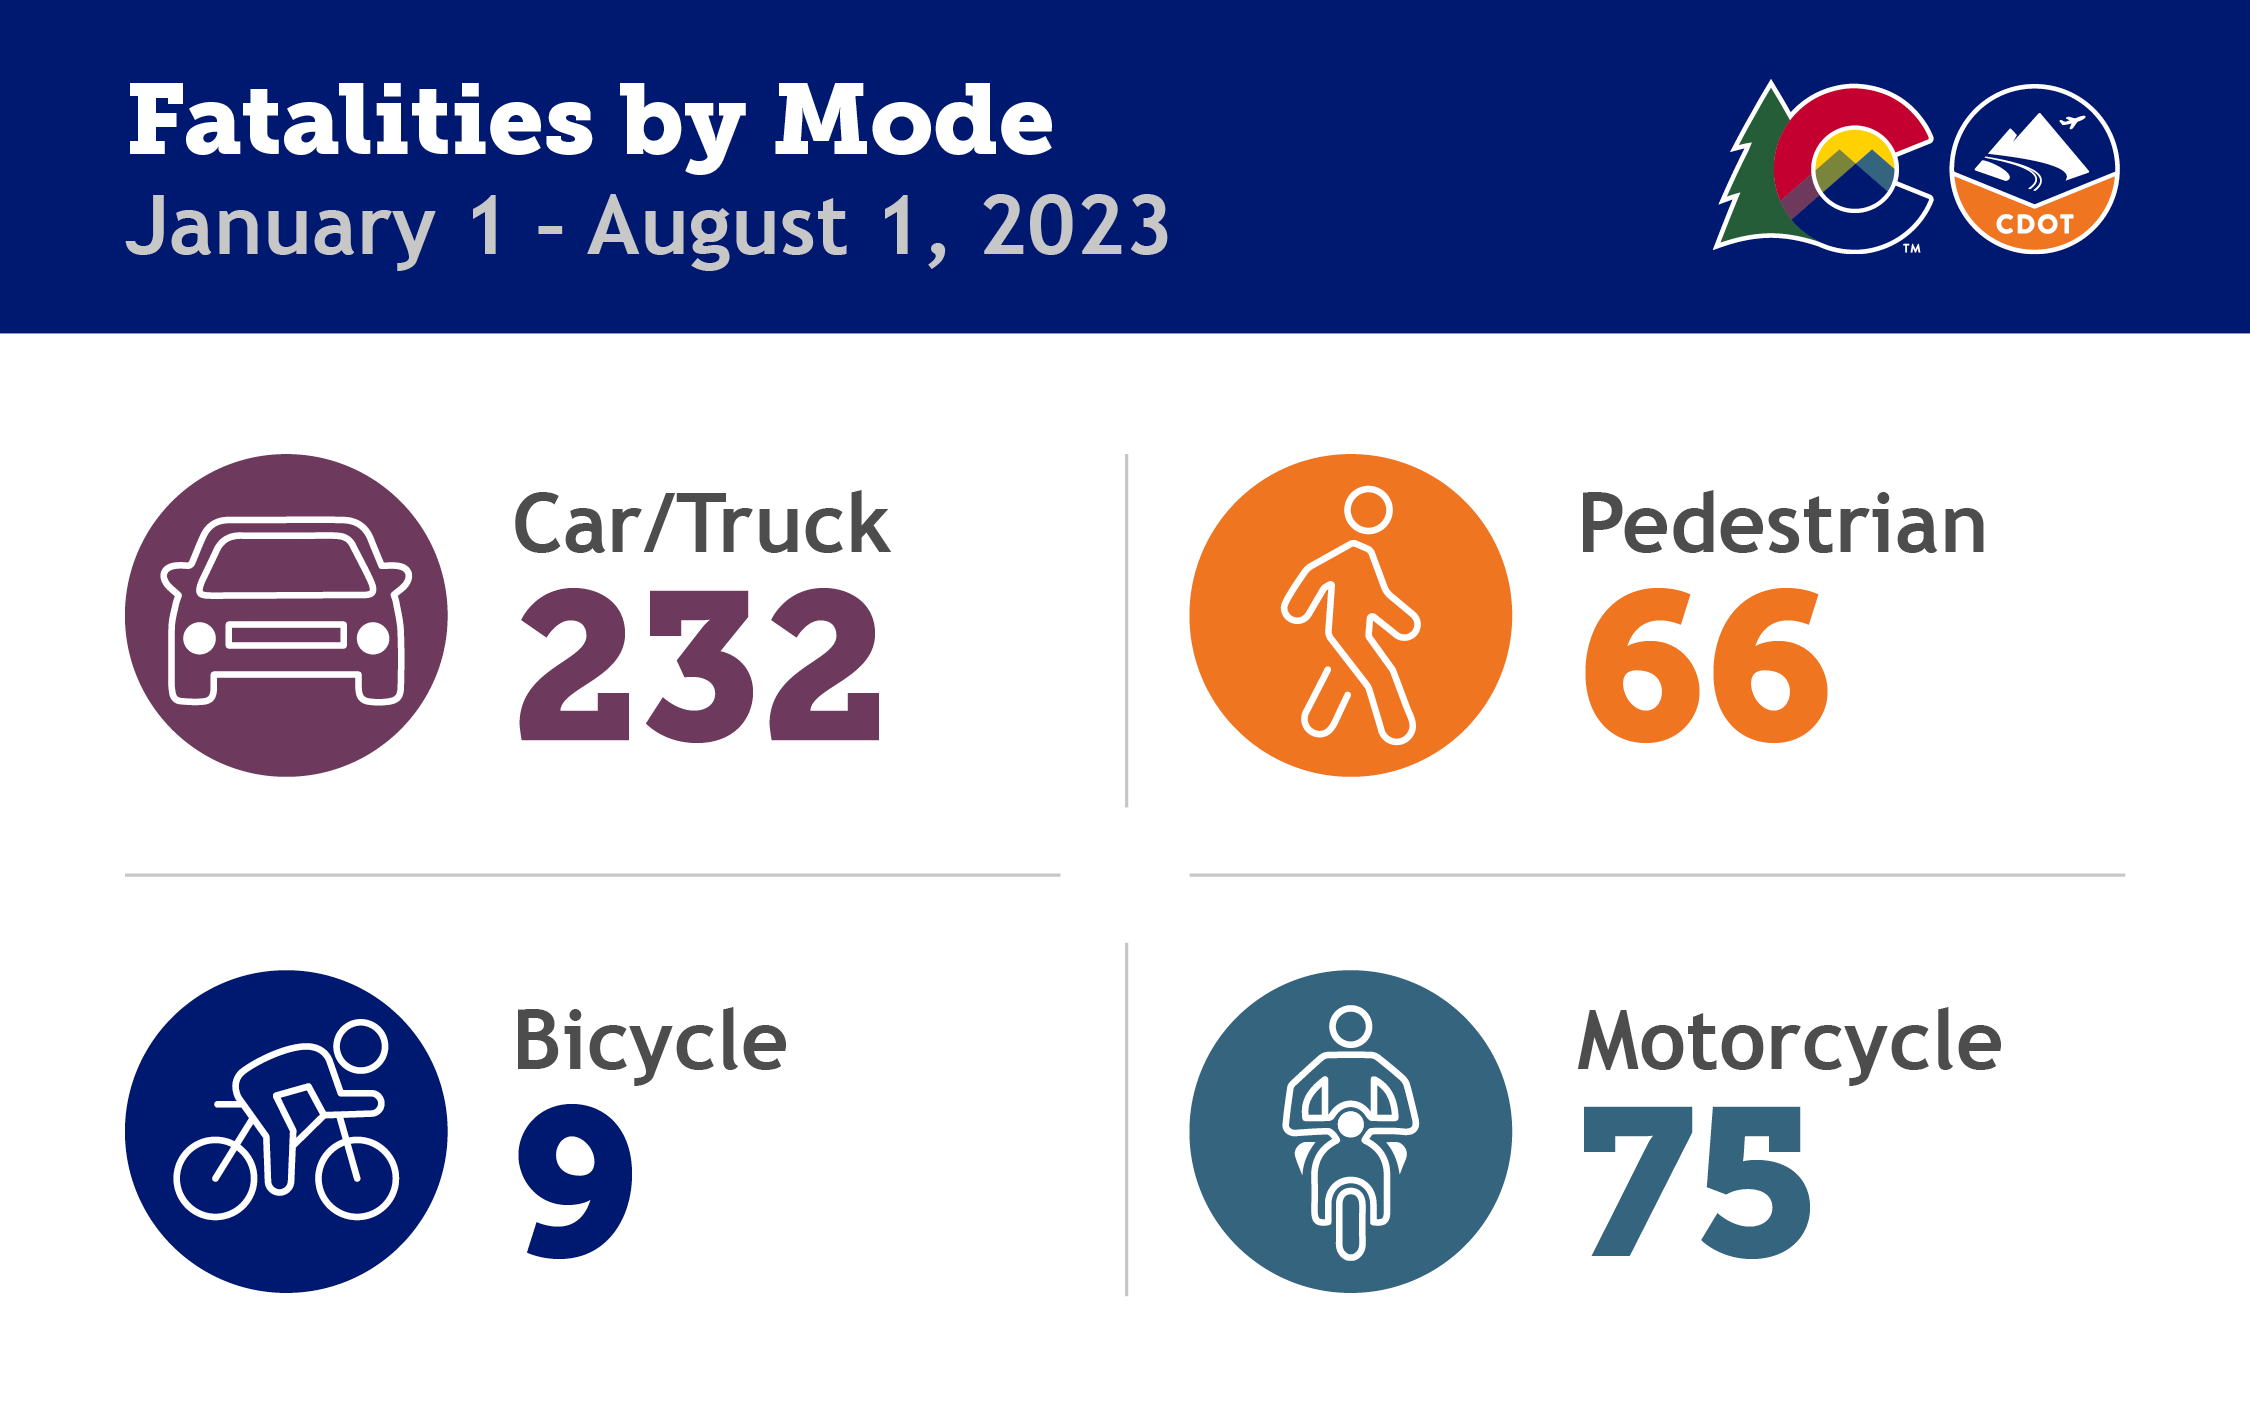 Fatalities by Mode January - August 2023 detail image